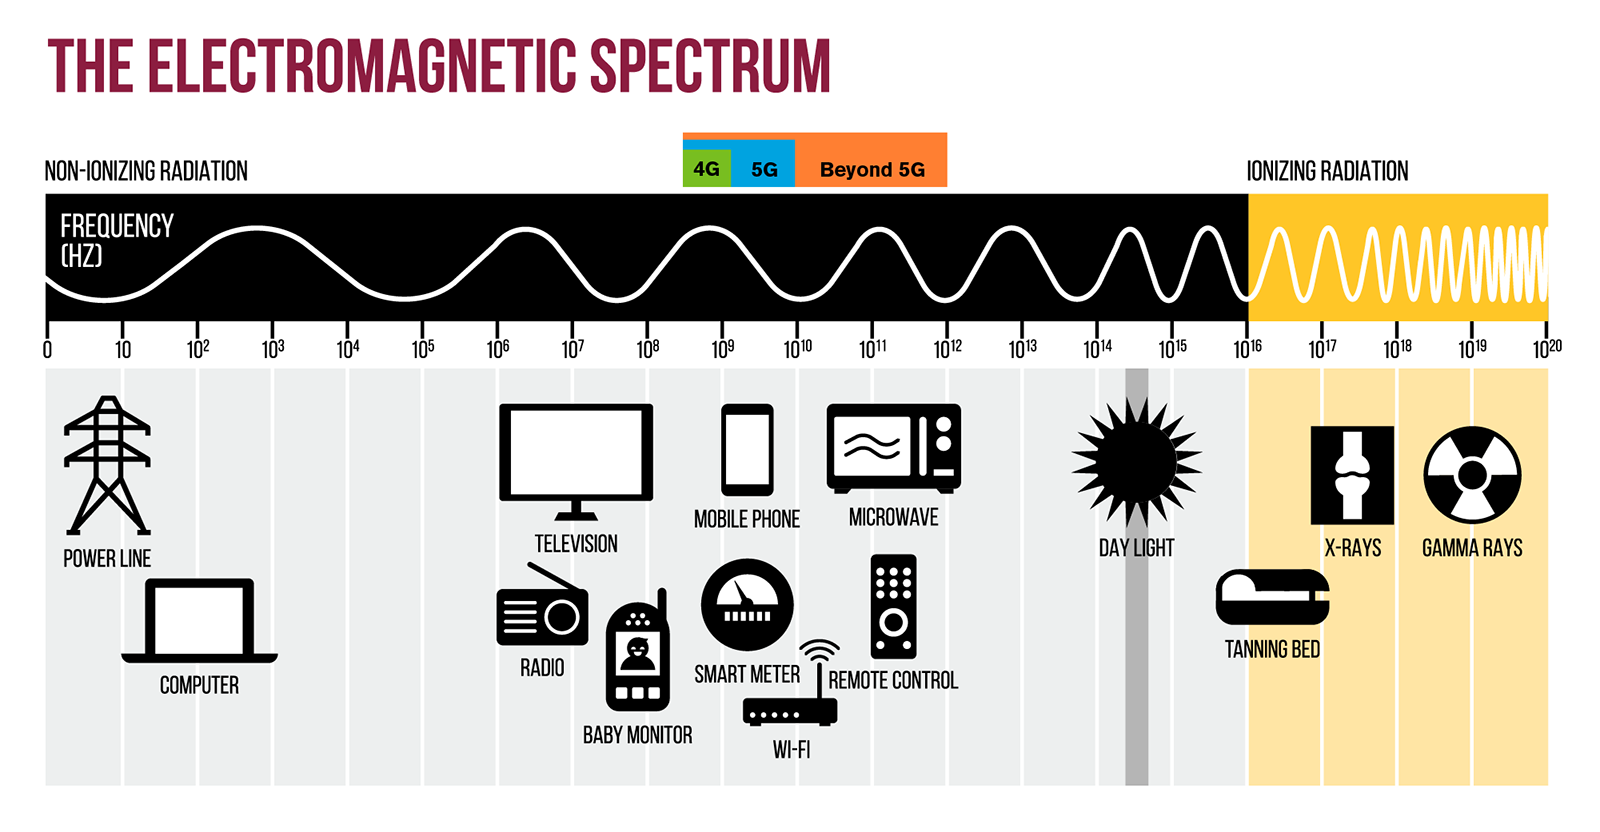 Electromagnetic spectrum diagram showing the frequencies of 4G, 5G and the future beyond 5G.